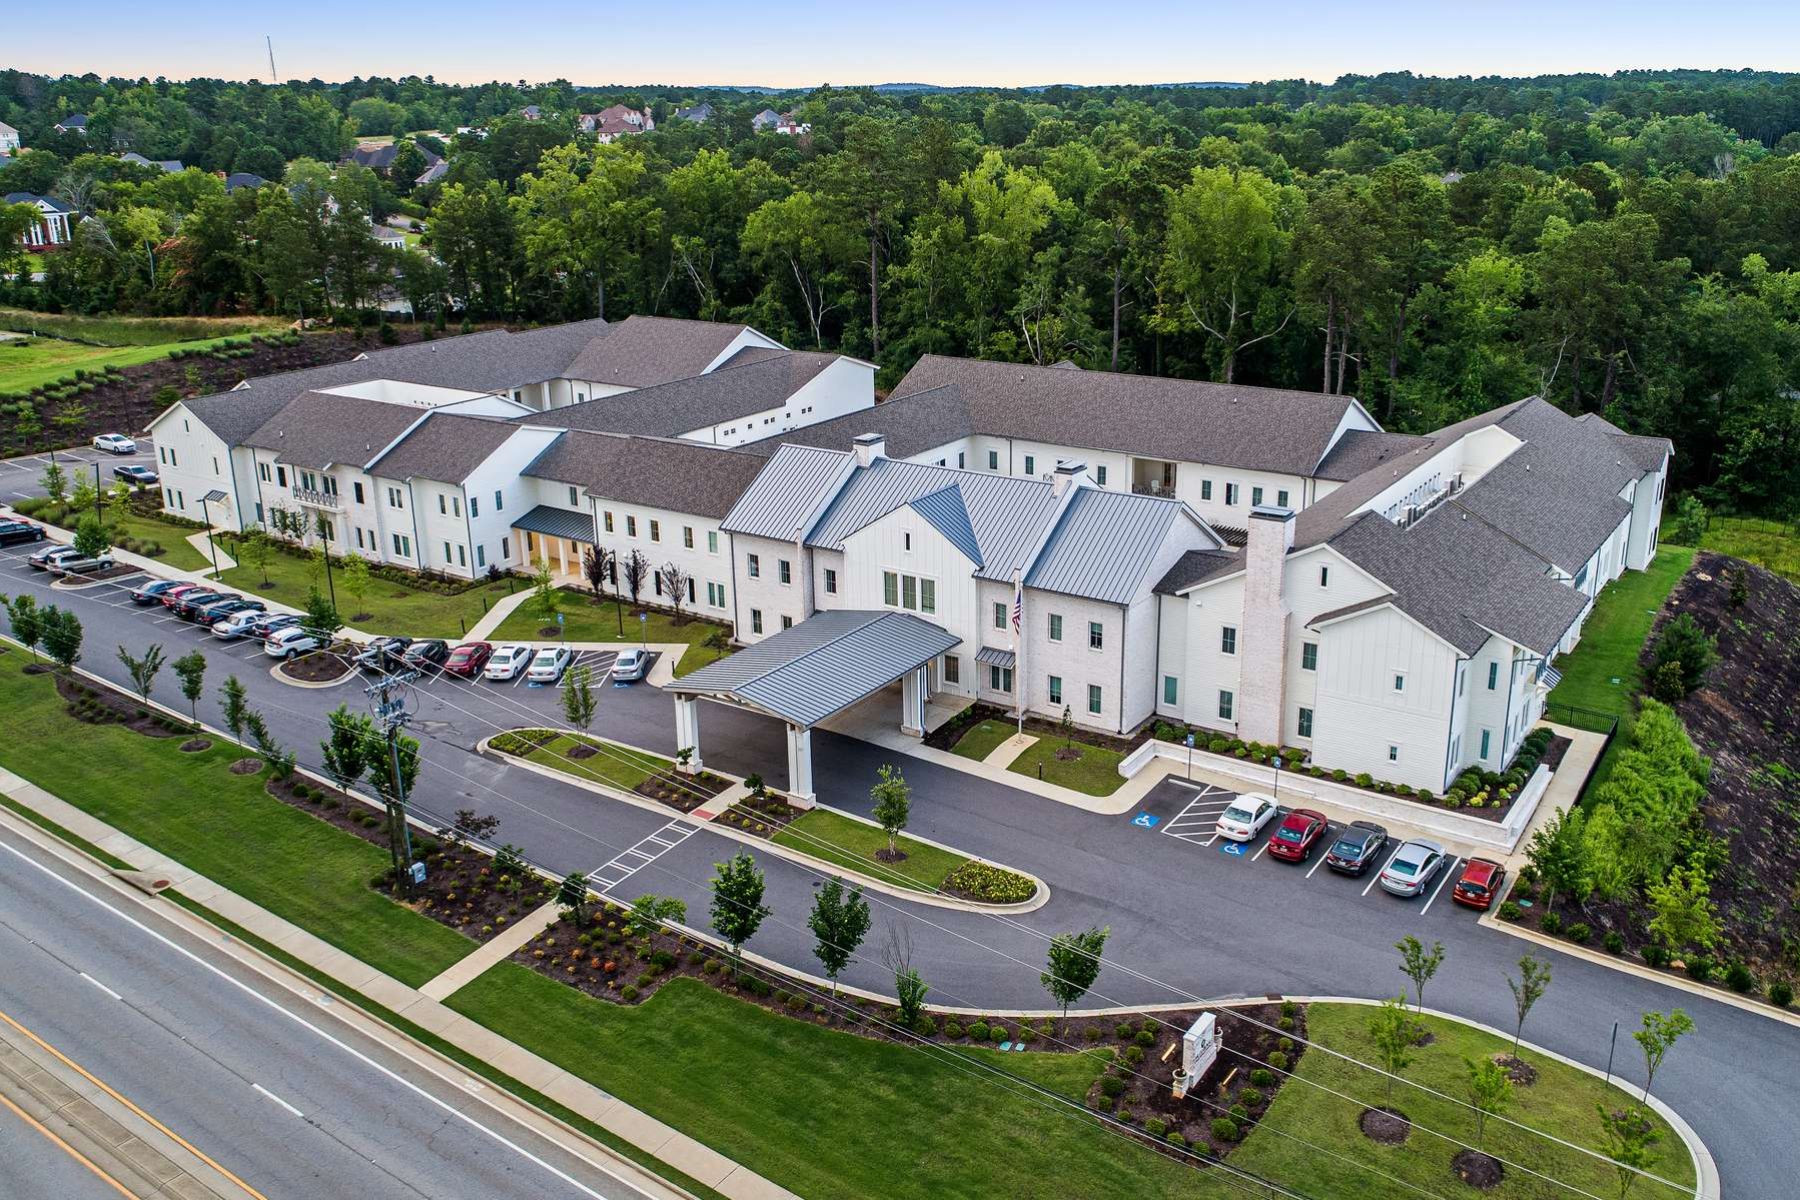 The Claiborne at West Lake aerial view of community and location with backdrop being a wooded setting